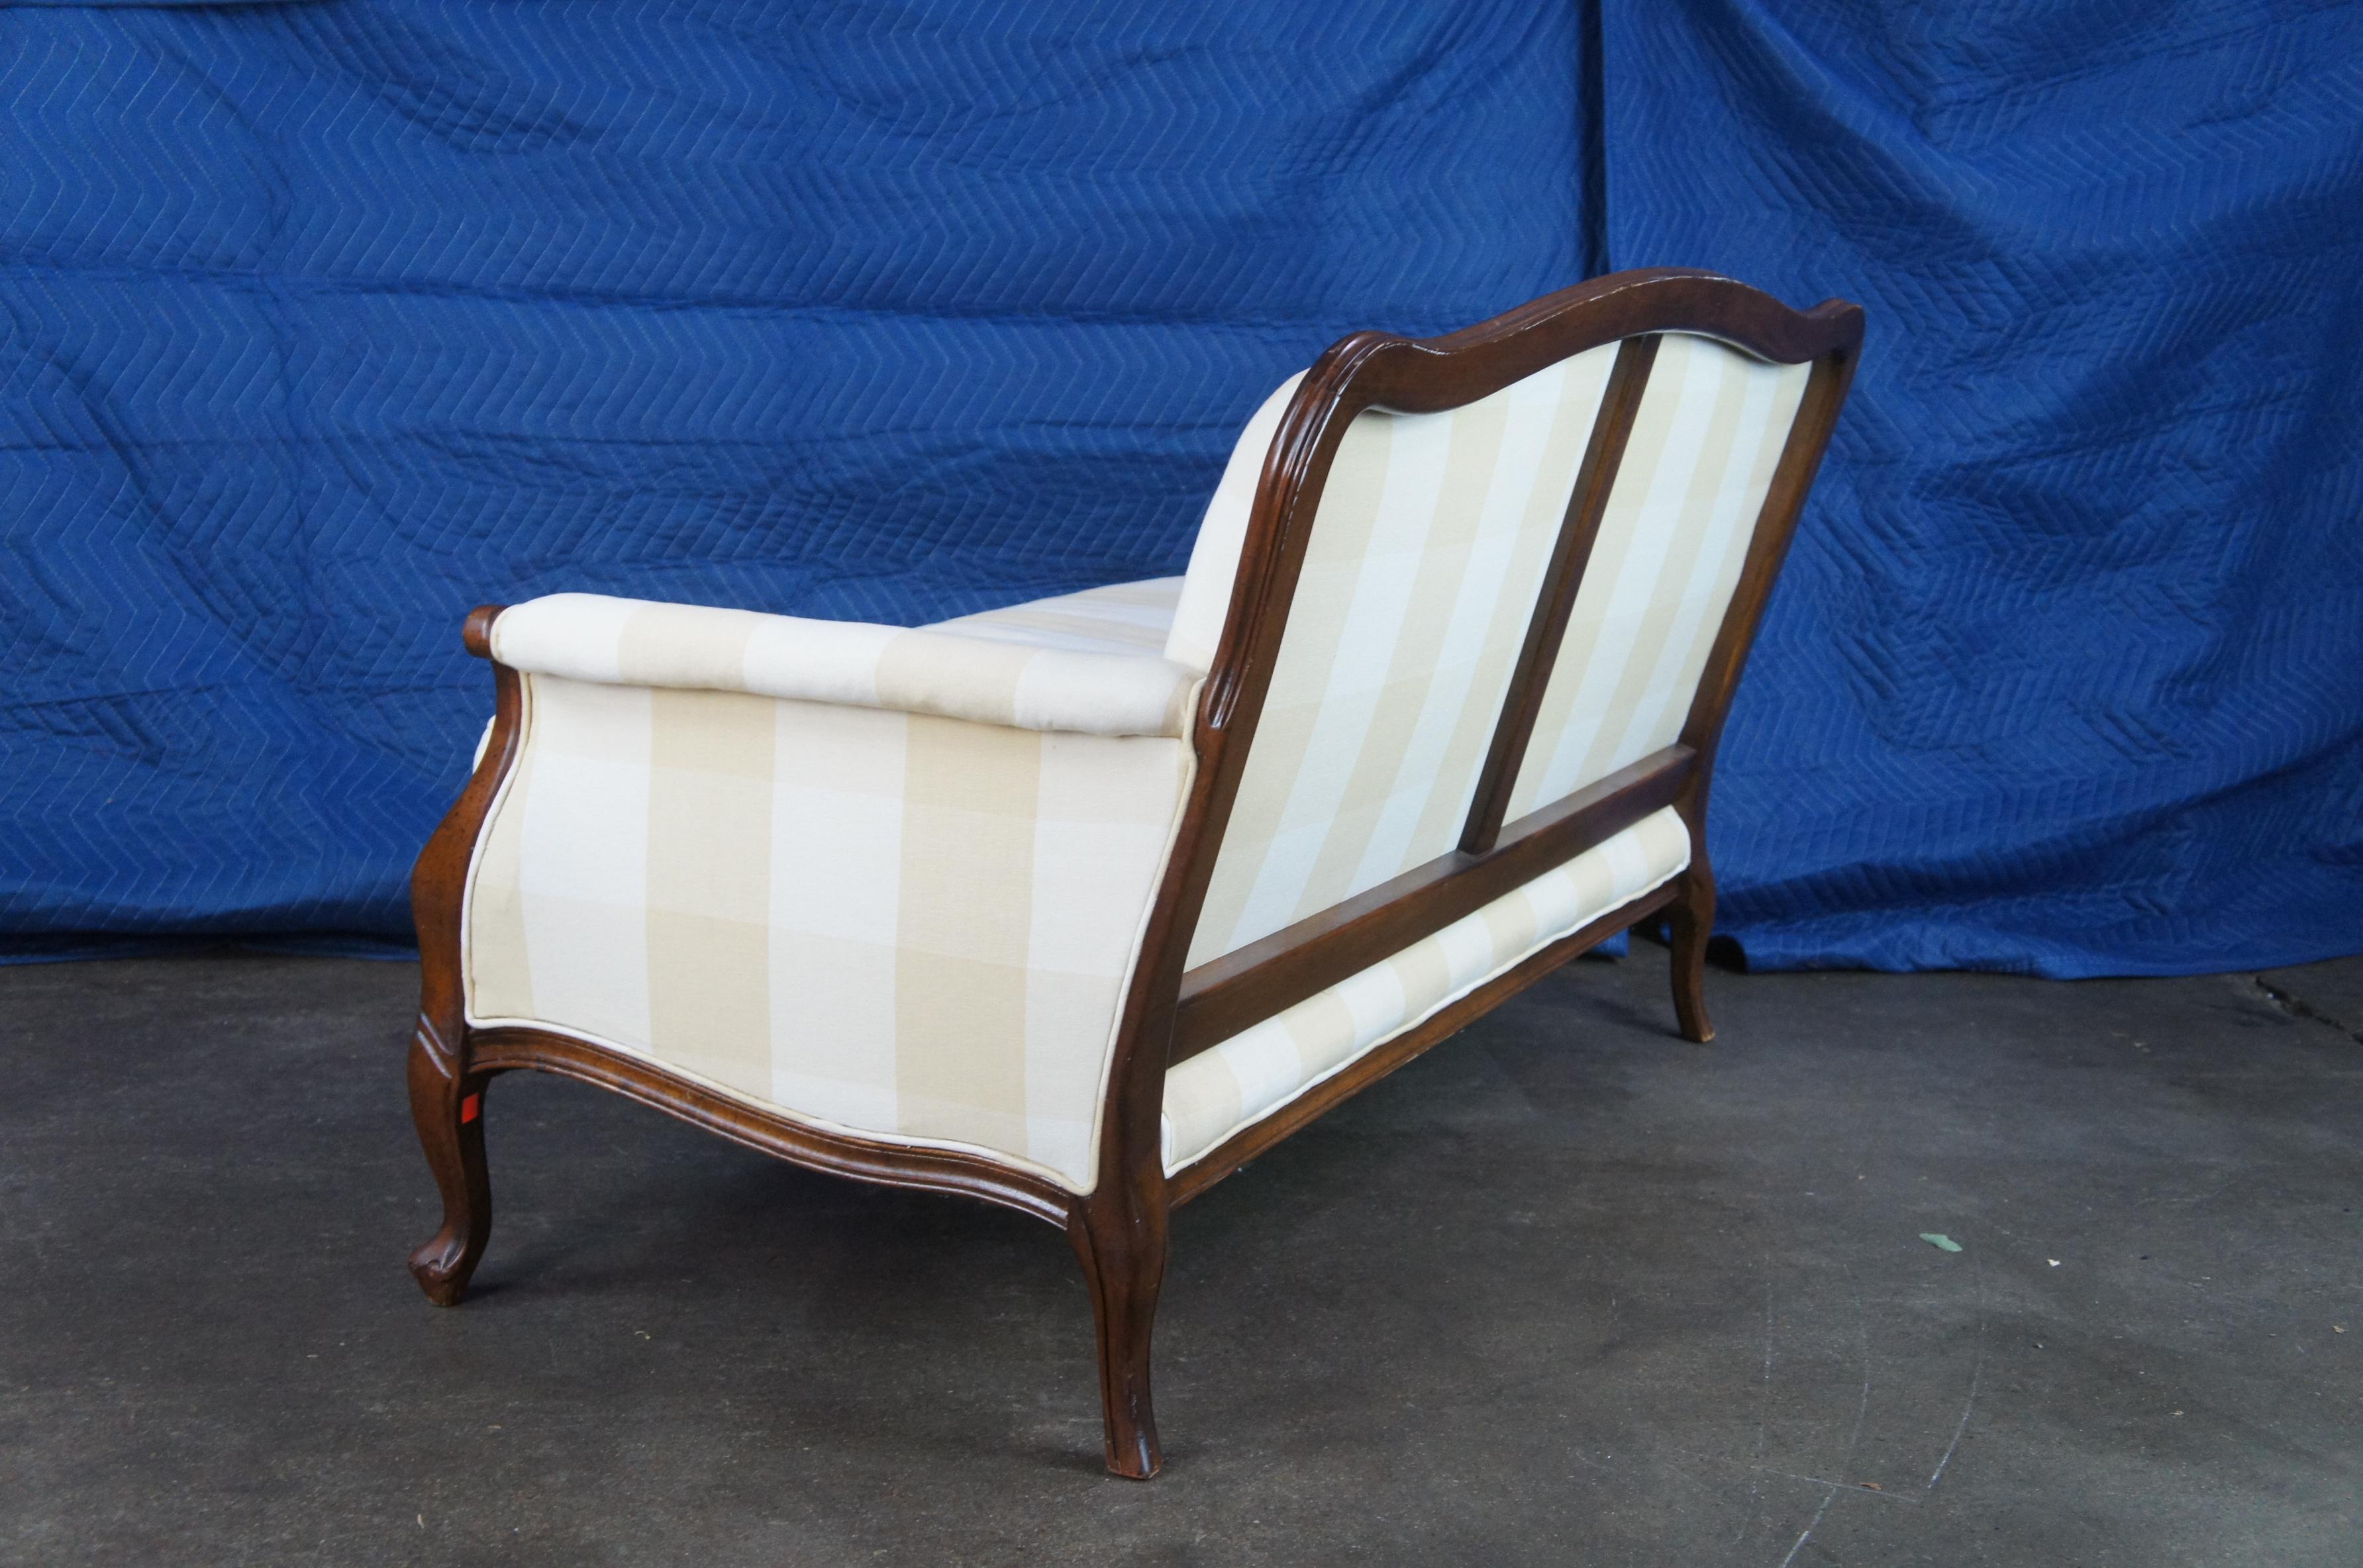 20th Century Antique French Country Walnut Plaid Serpentine Camelback Settee Love Seat